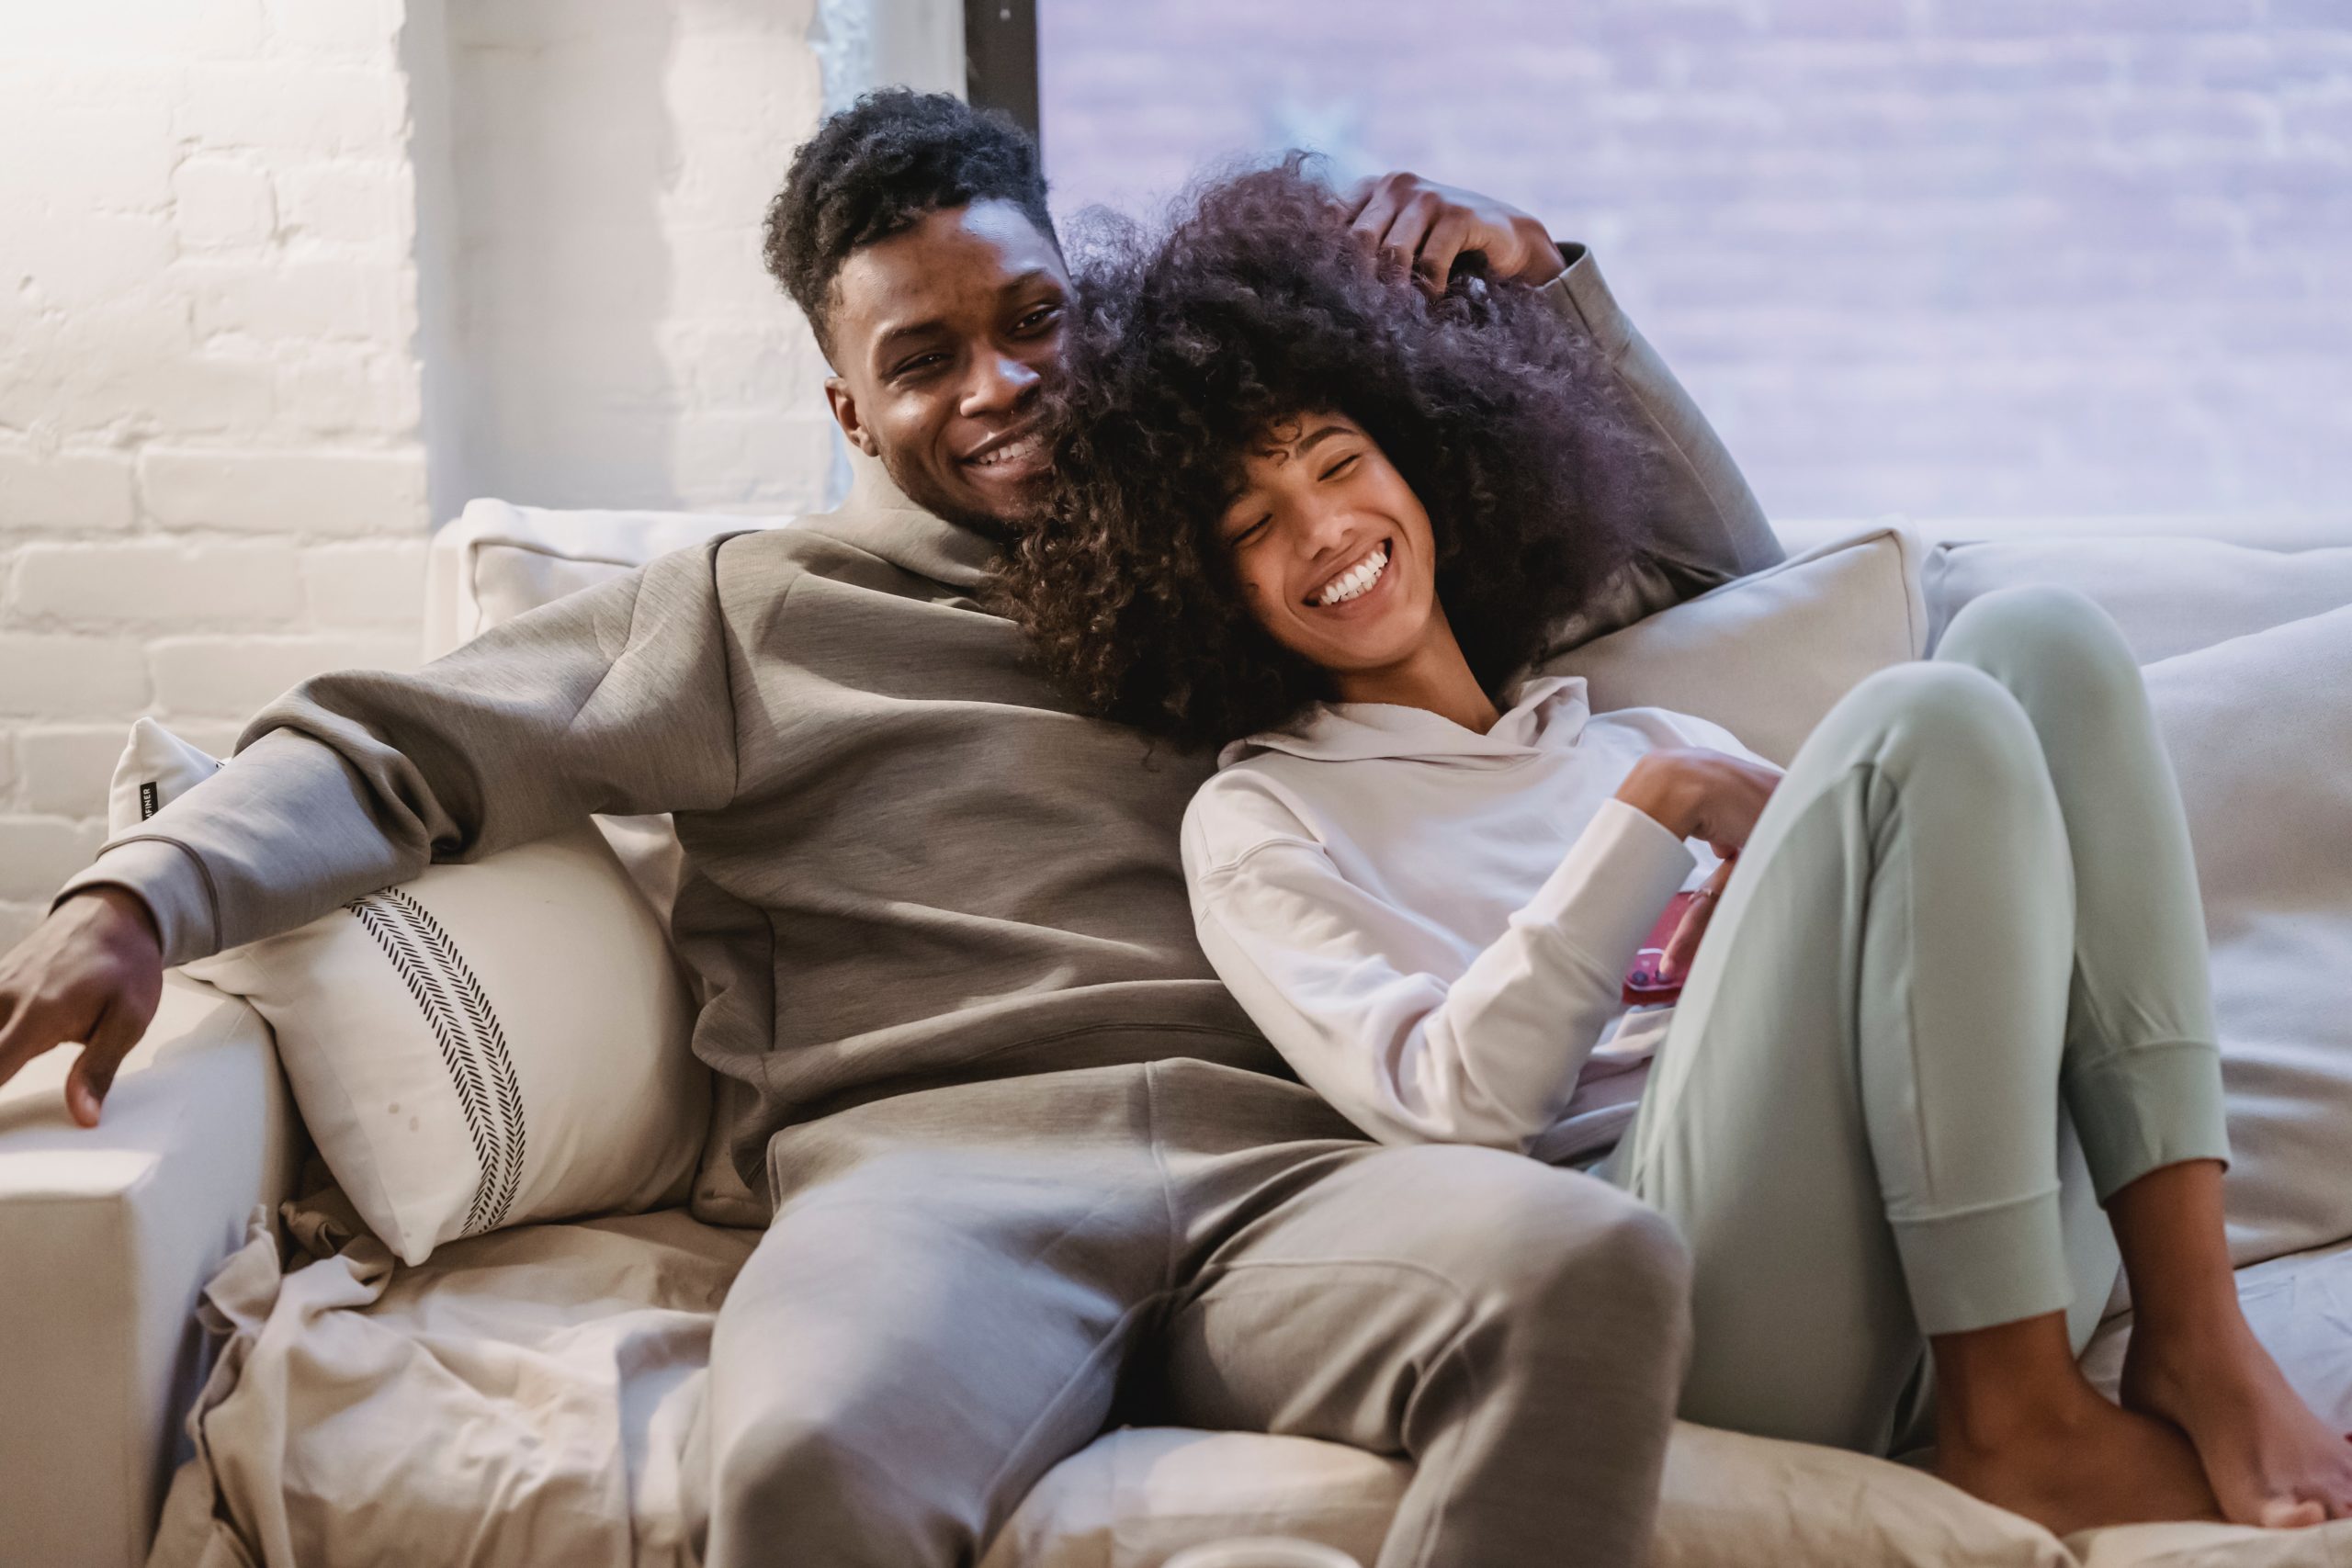 A Black couple laughing on the couch together